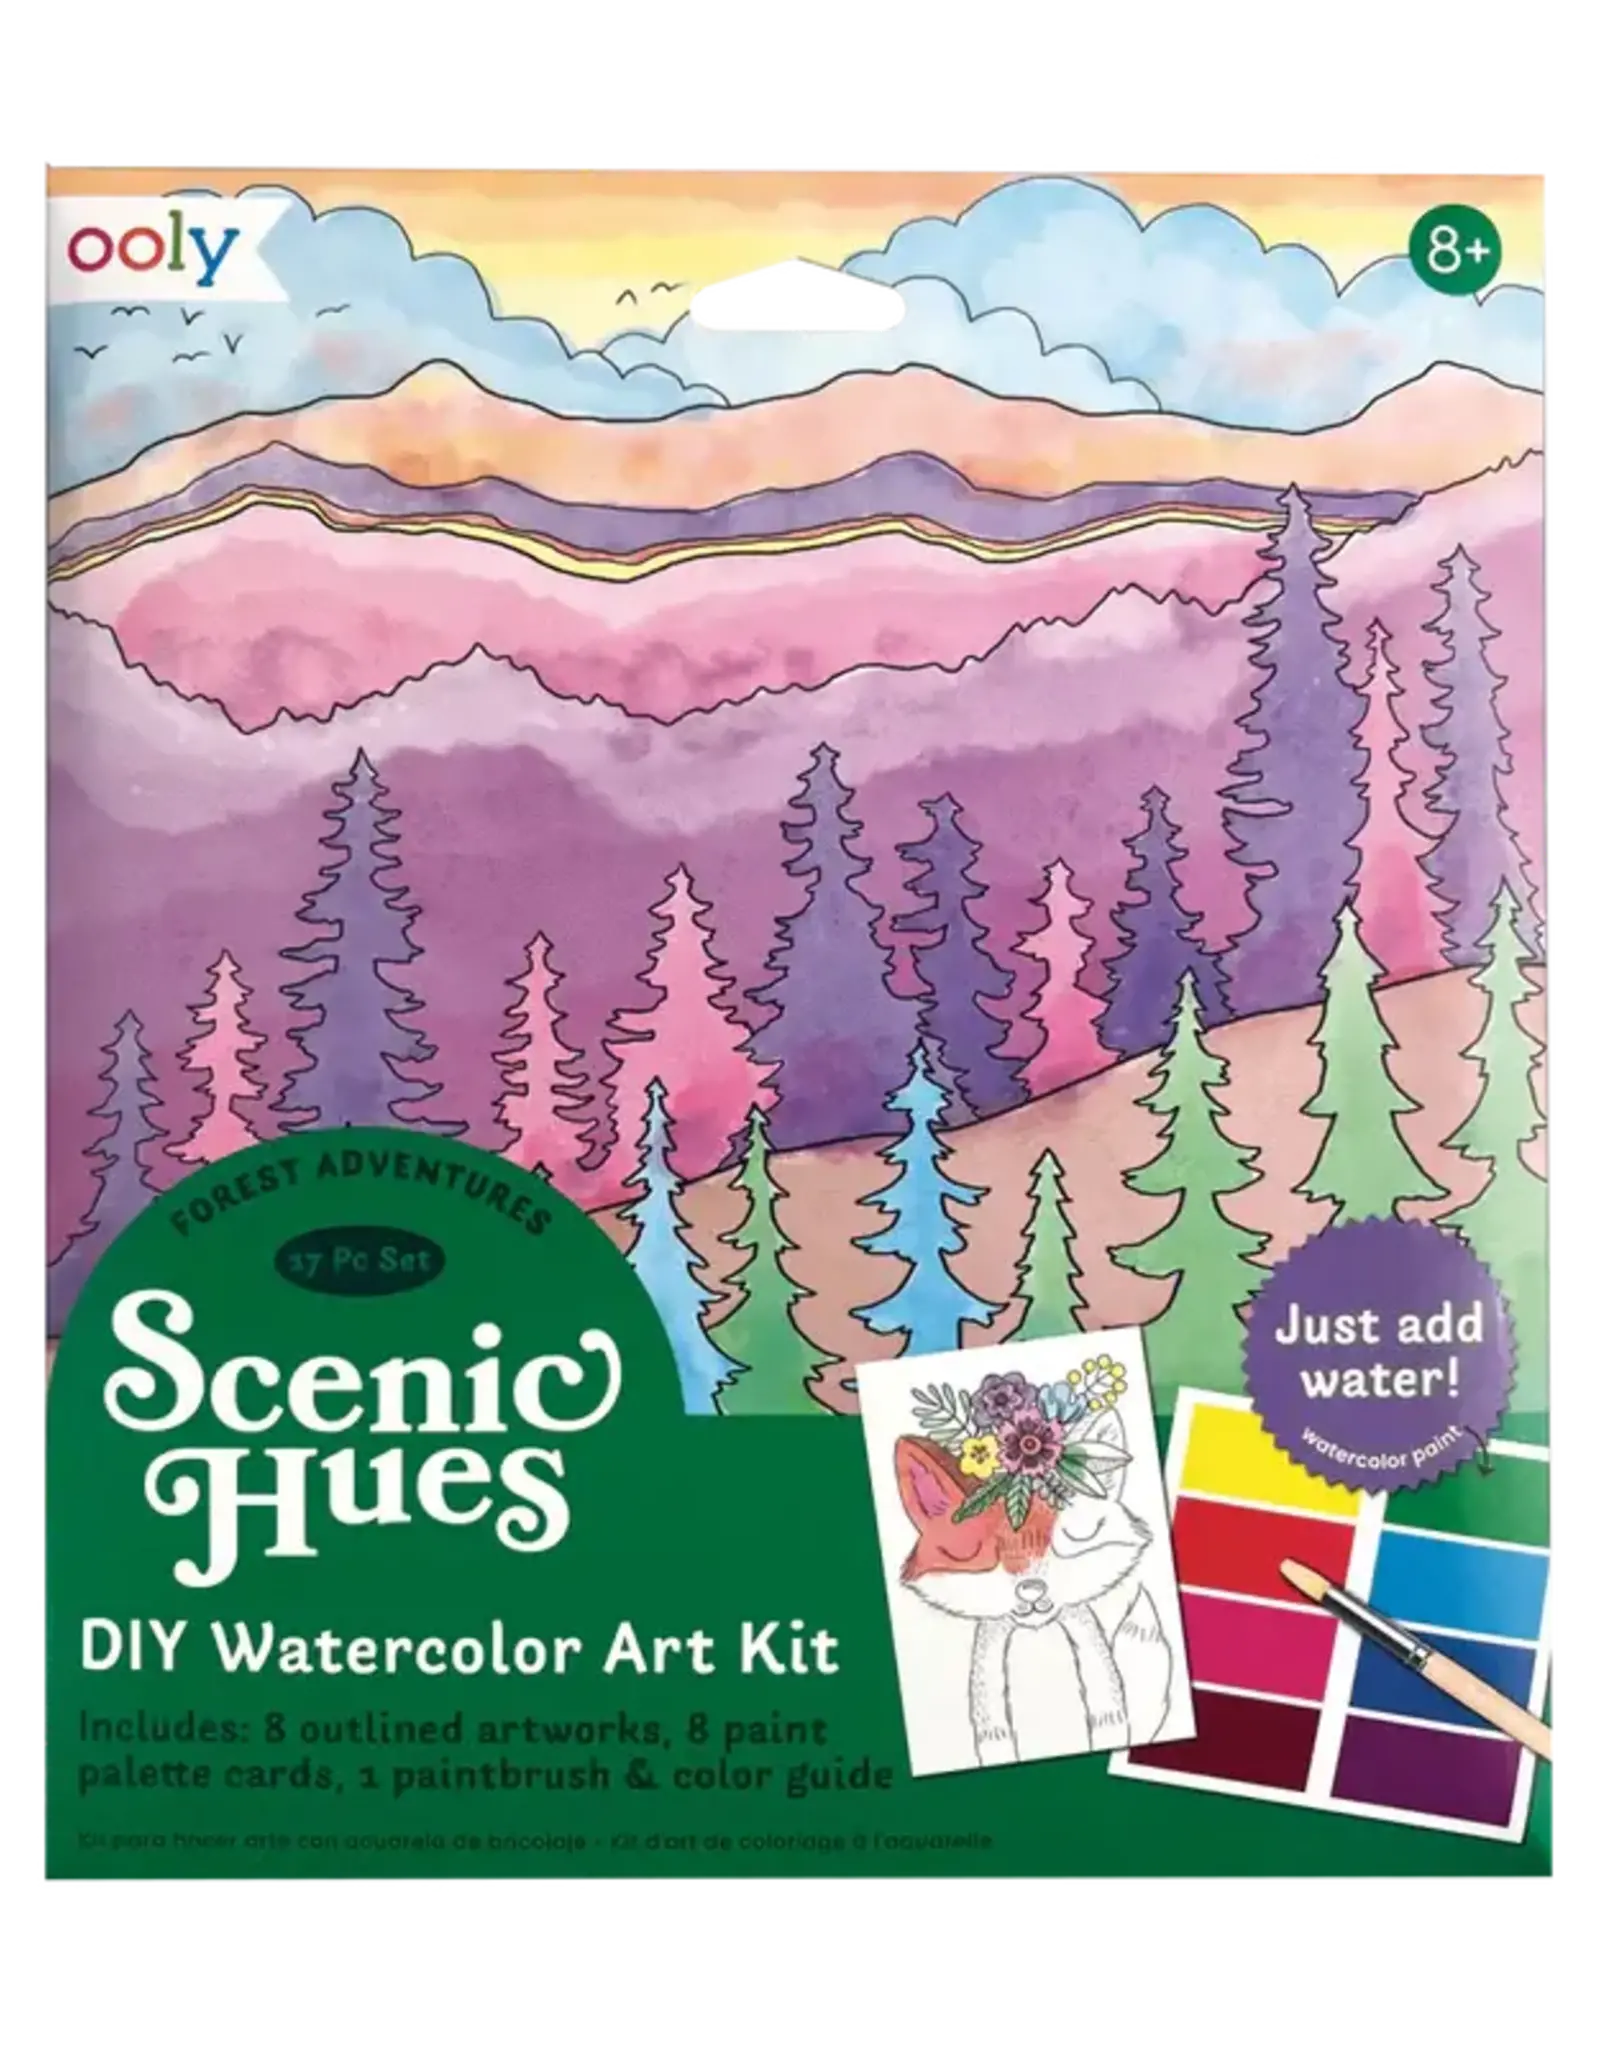 Ooly Scenic Hues D.I.Y. Watercolor Art Kit - Forest Adventure